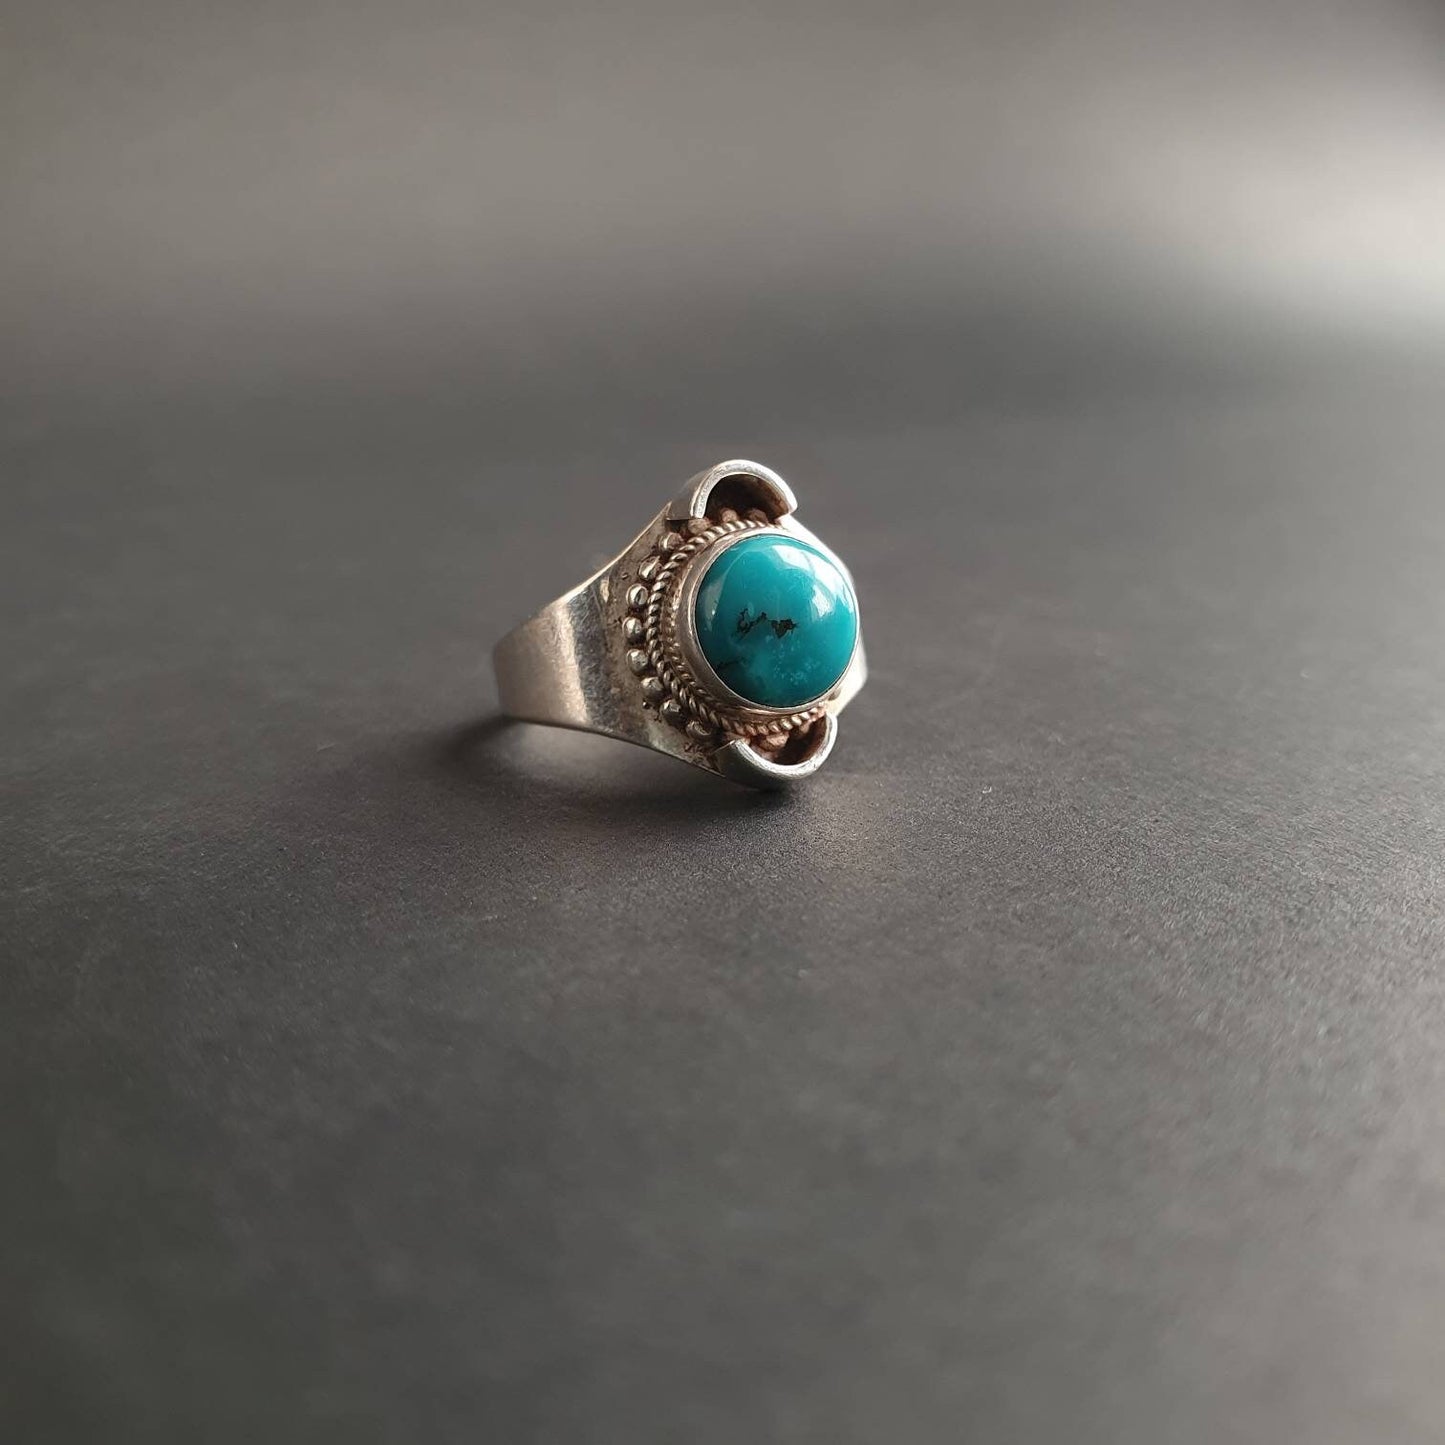 Saddle ring,Turquoise gemstone ring,Turquoise gemstones, statement ring, gifts for all occasions ,sterling silver, unique gift,